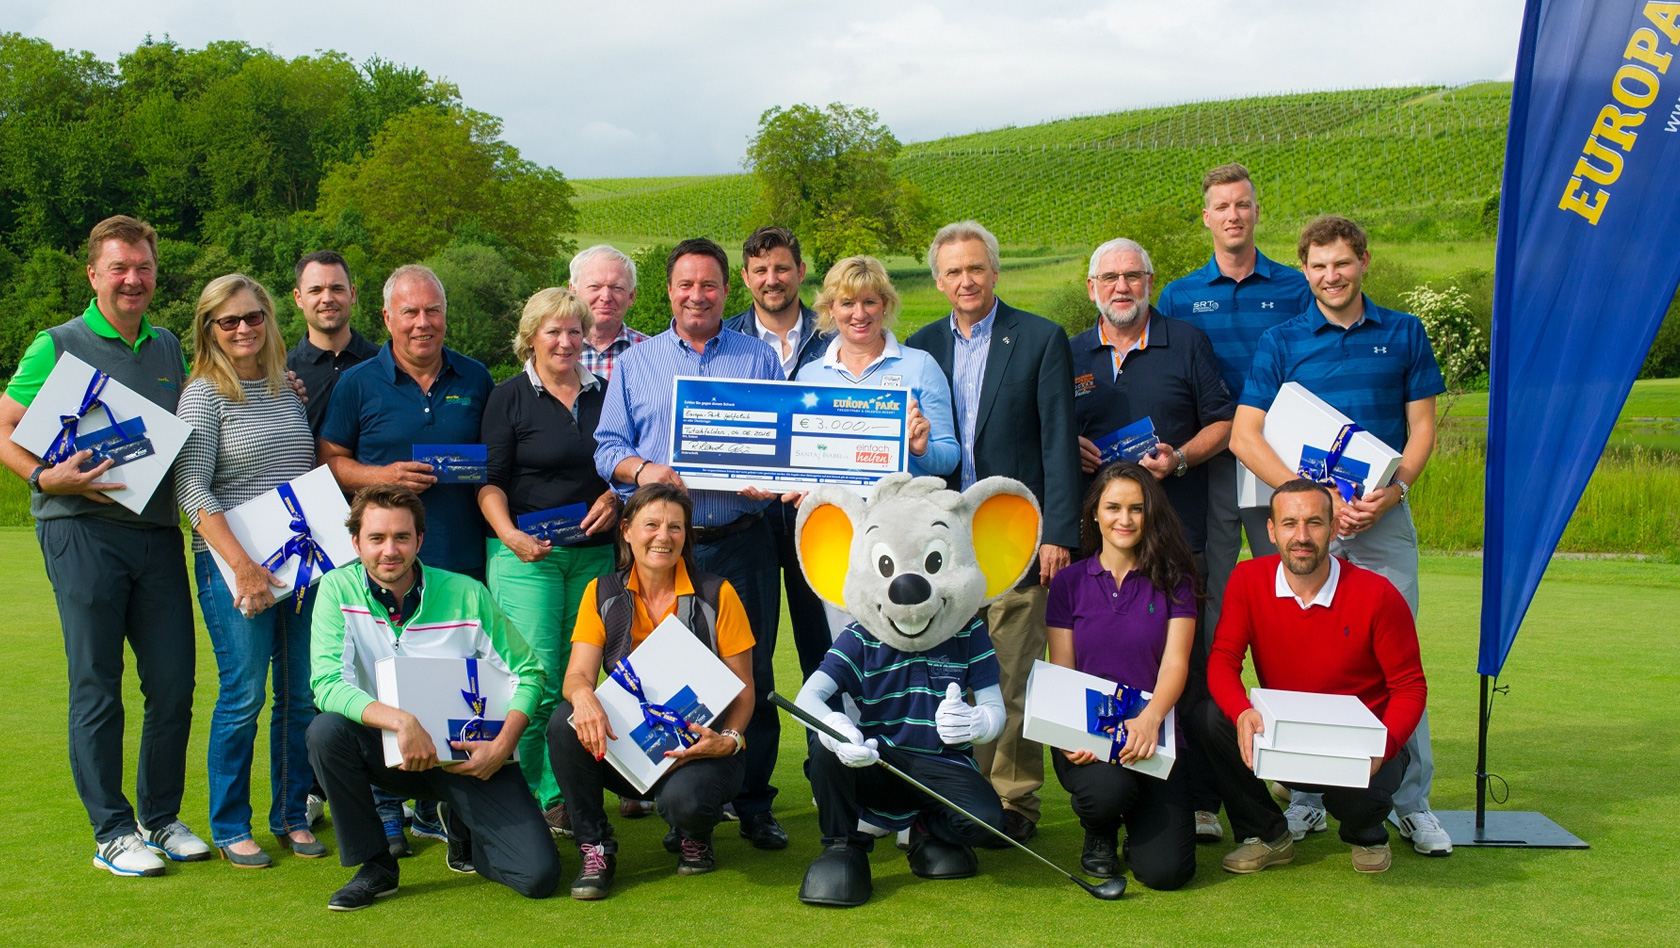 Euromaus Charity Golf Cup 2016